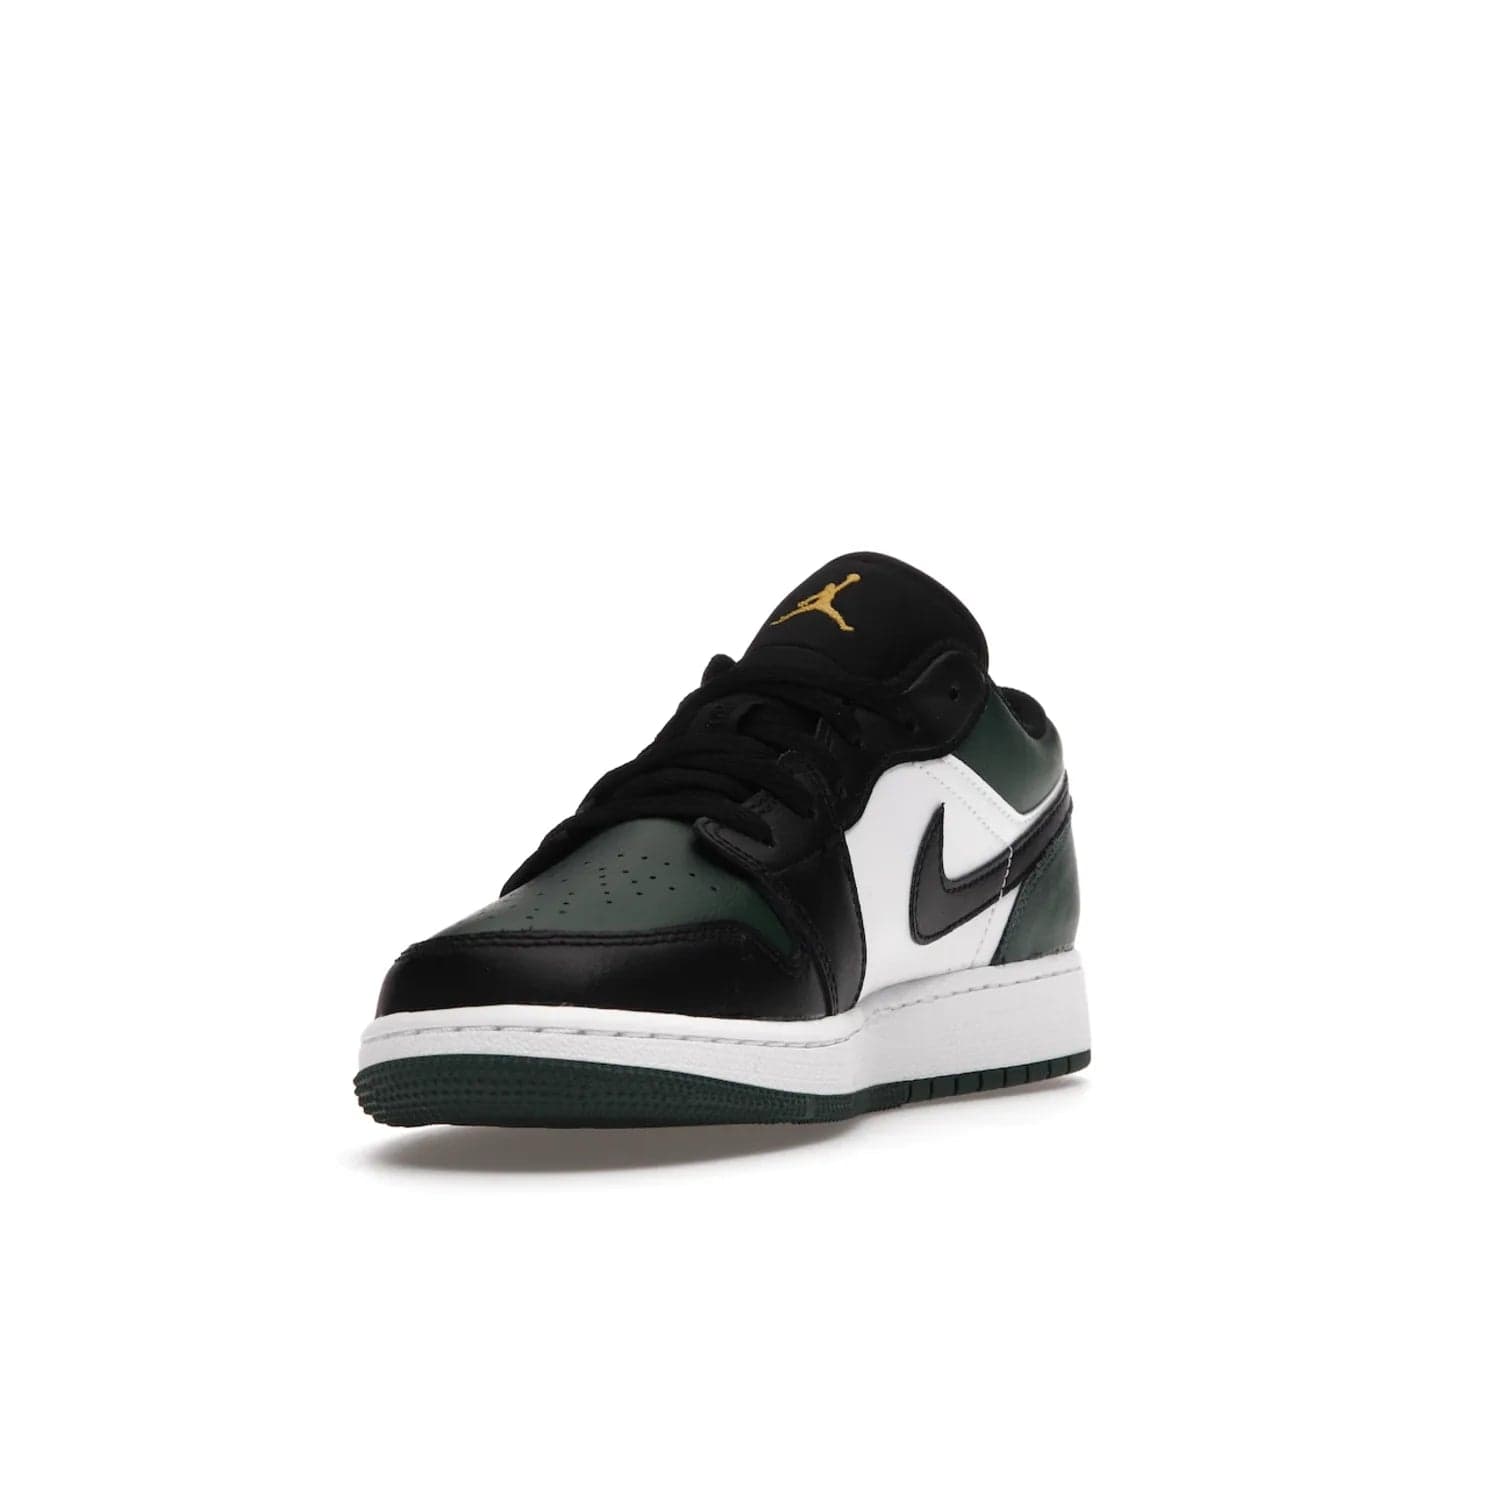 Jordan 1 Low Green Toe (GS) - Image 13 - Only at www.BallersClubKickz.com - Get the perfect low cut Jordans. Shop the Air Jordan 1 Low Noble Green GS shoes with its unique colorway and stencil Jumpman logo. Available October 2021.